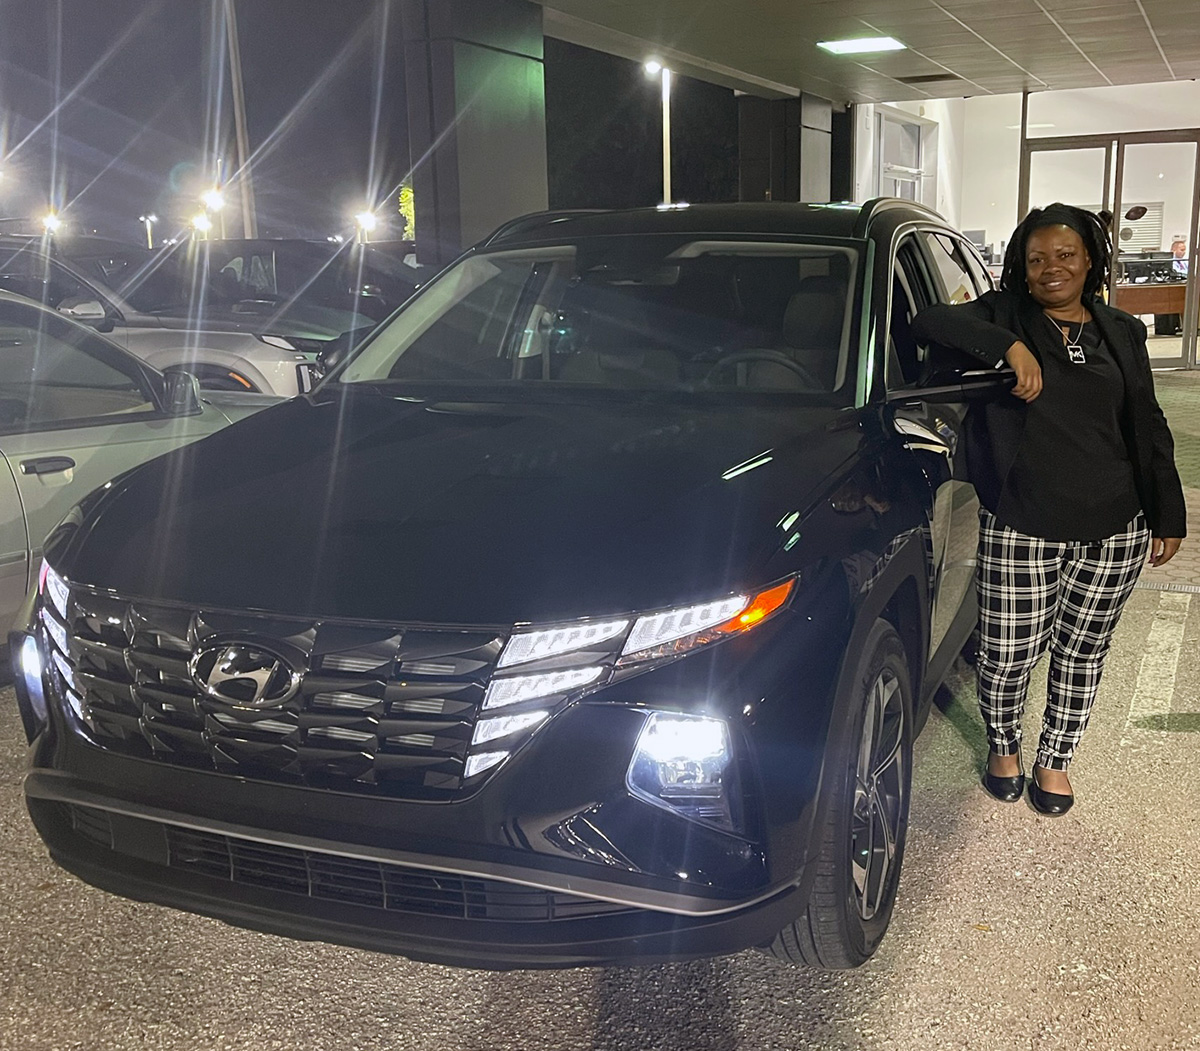 When you're a #RepeatCustomer like Ebonee Ives, you know what to expect... #ExcellentService and a great #NewSUV like the #2023Tucson. Salesperson #ShaunDotting helped make buying #Easy & #Professional. #ThankYou Ebonee for choosing us - #Enjoy - we're here for you! #GreatService